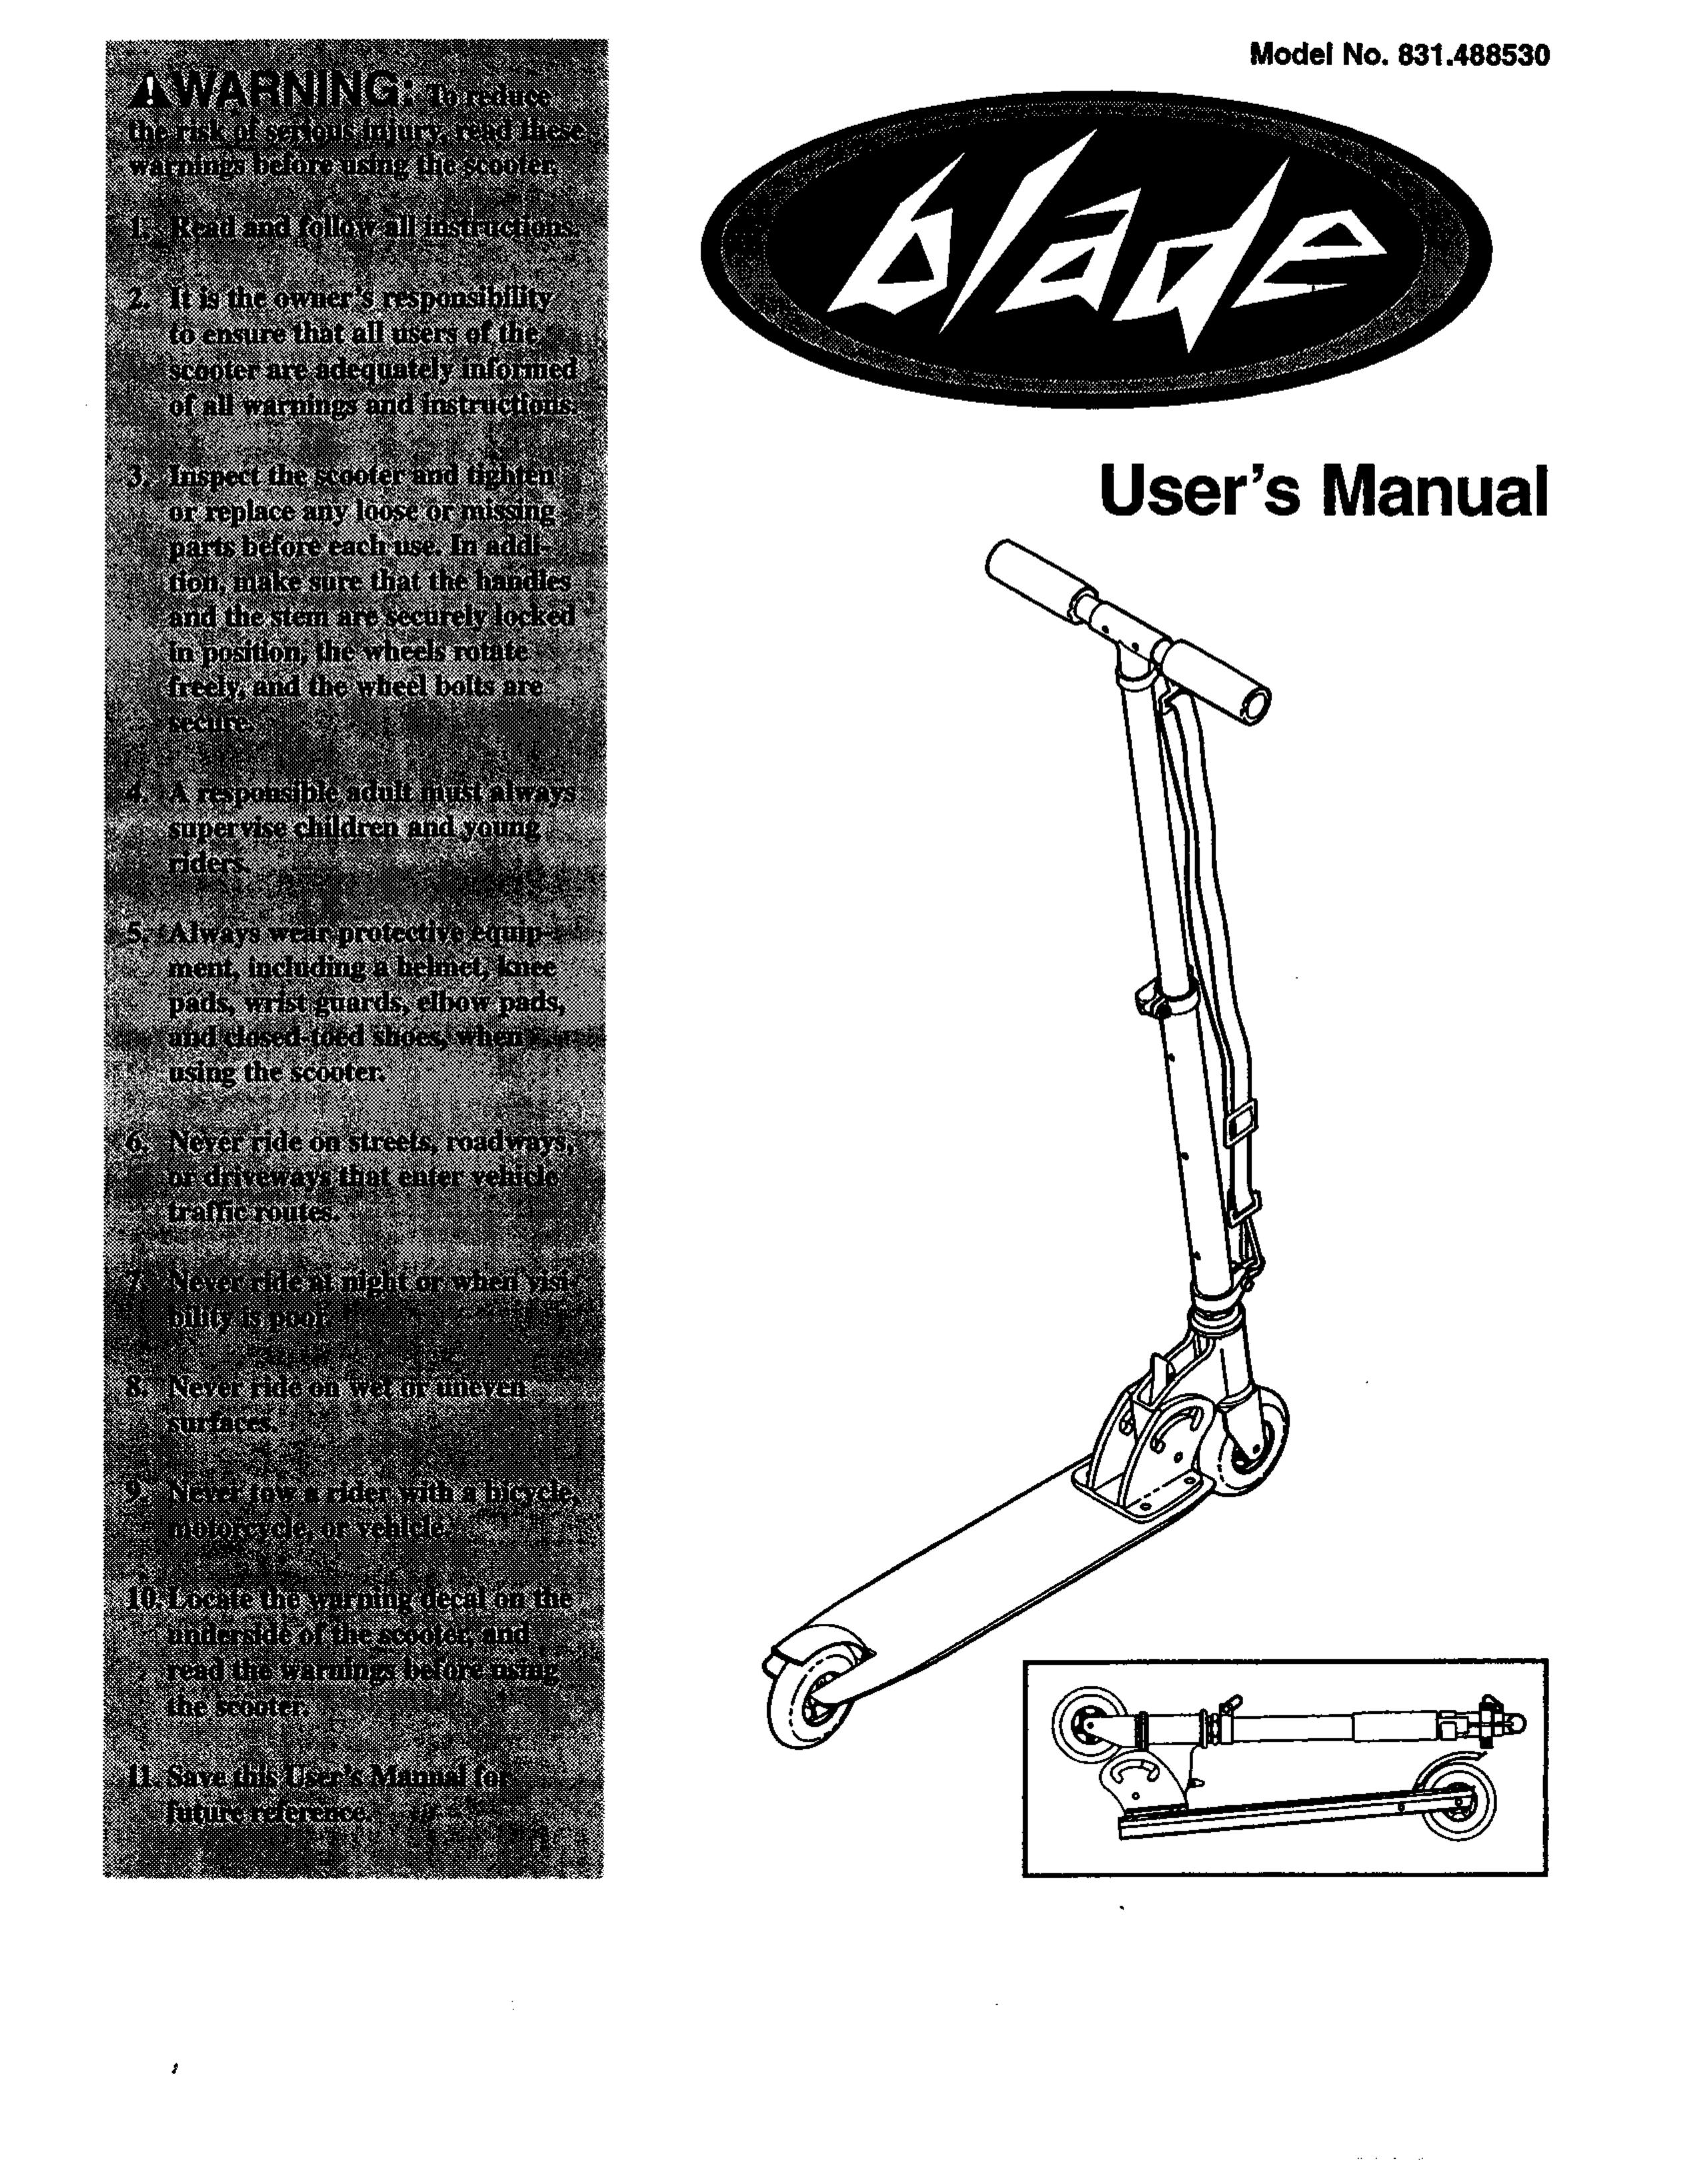 Blade ICE 831.48853 Mobility Scooter User Manual